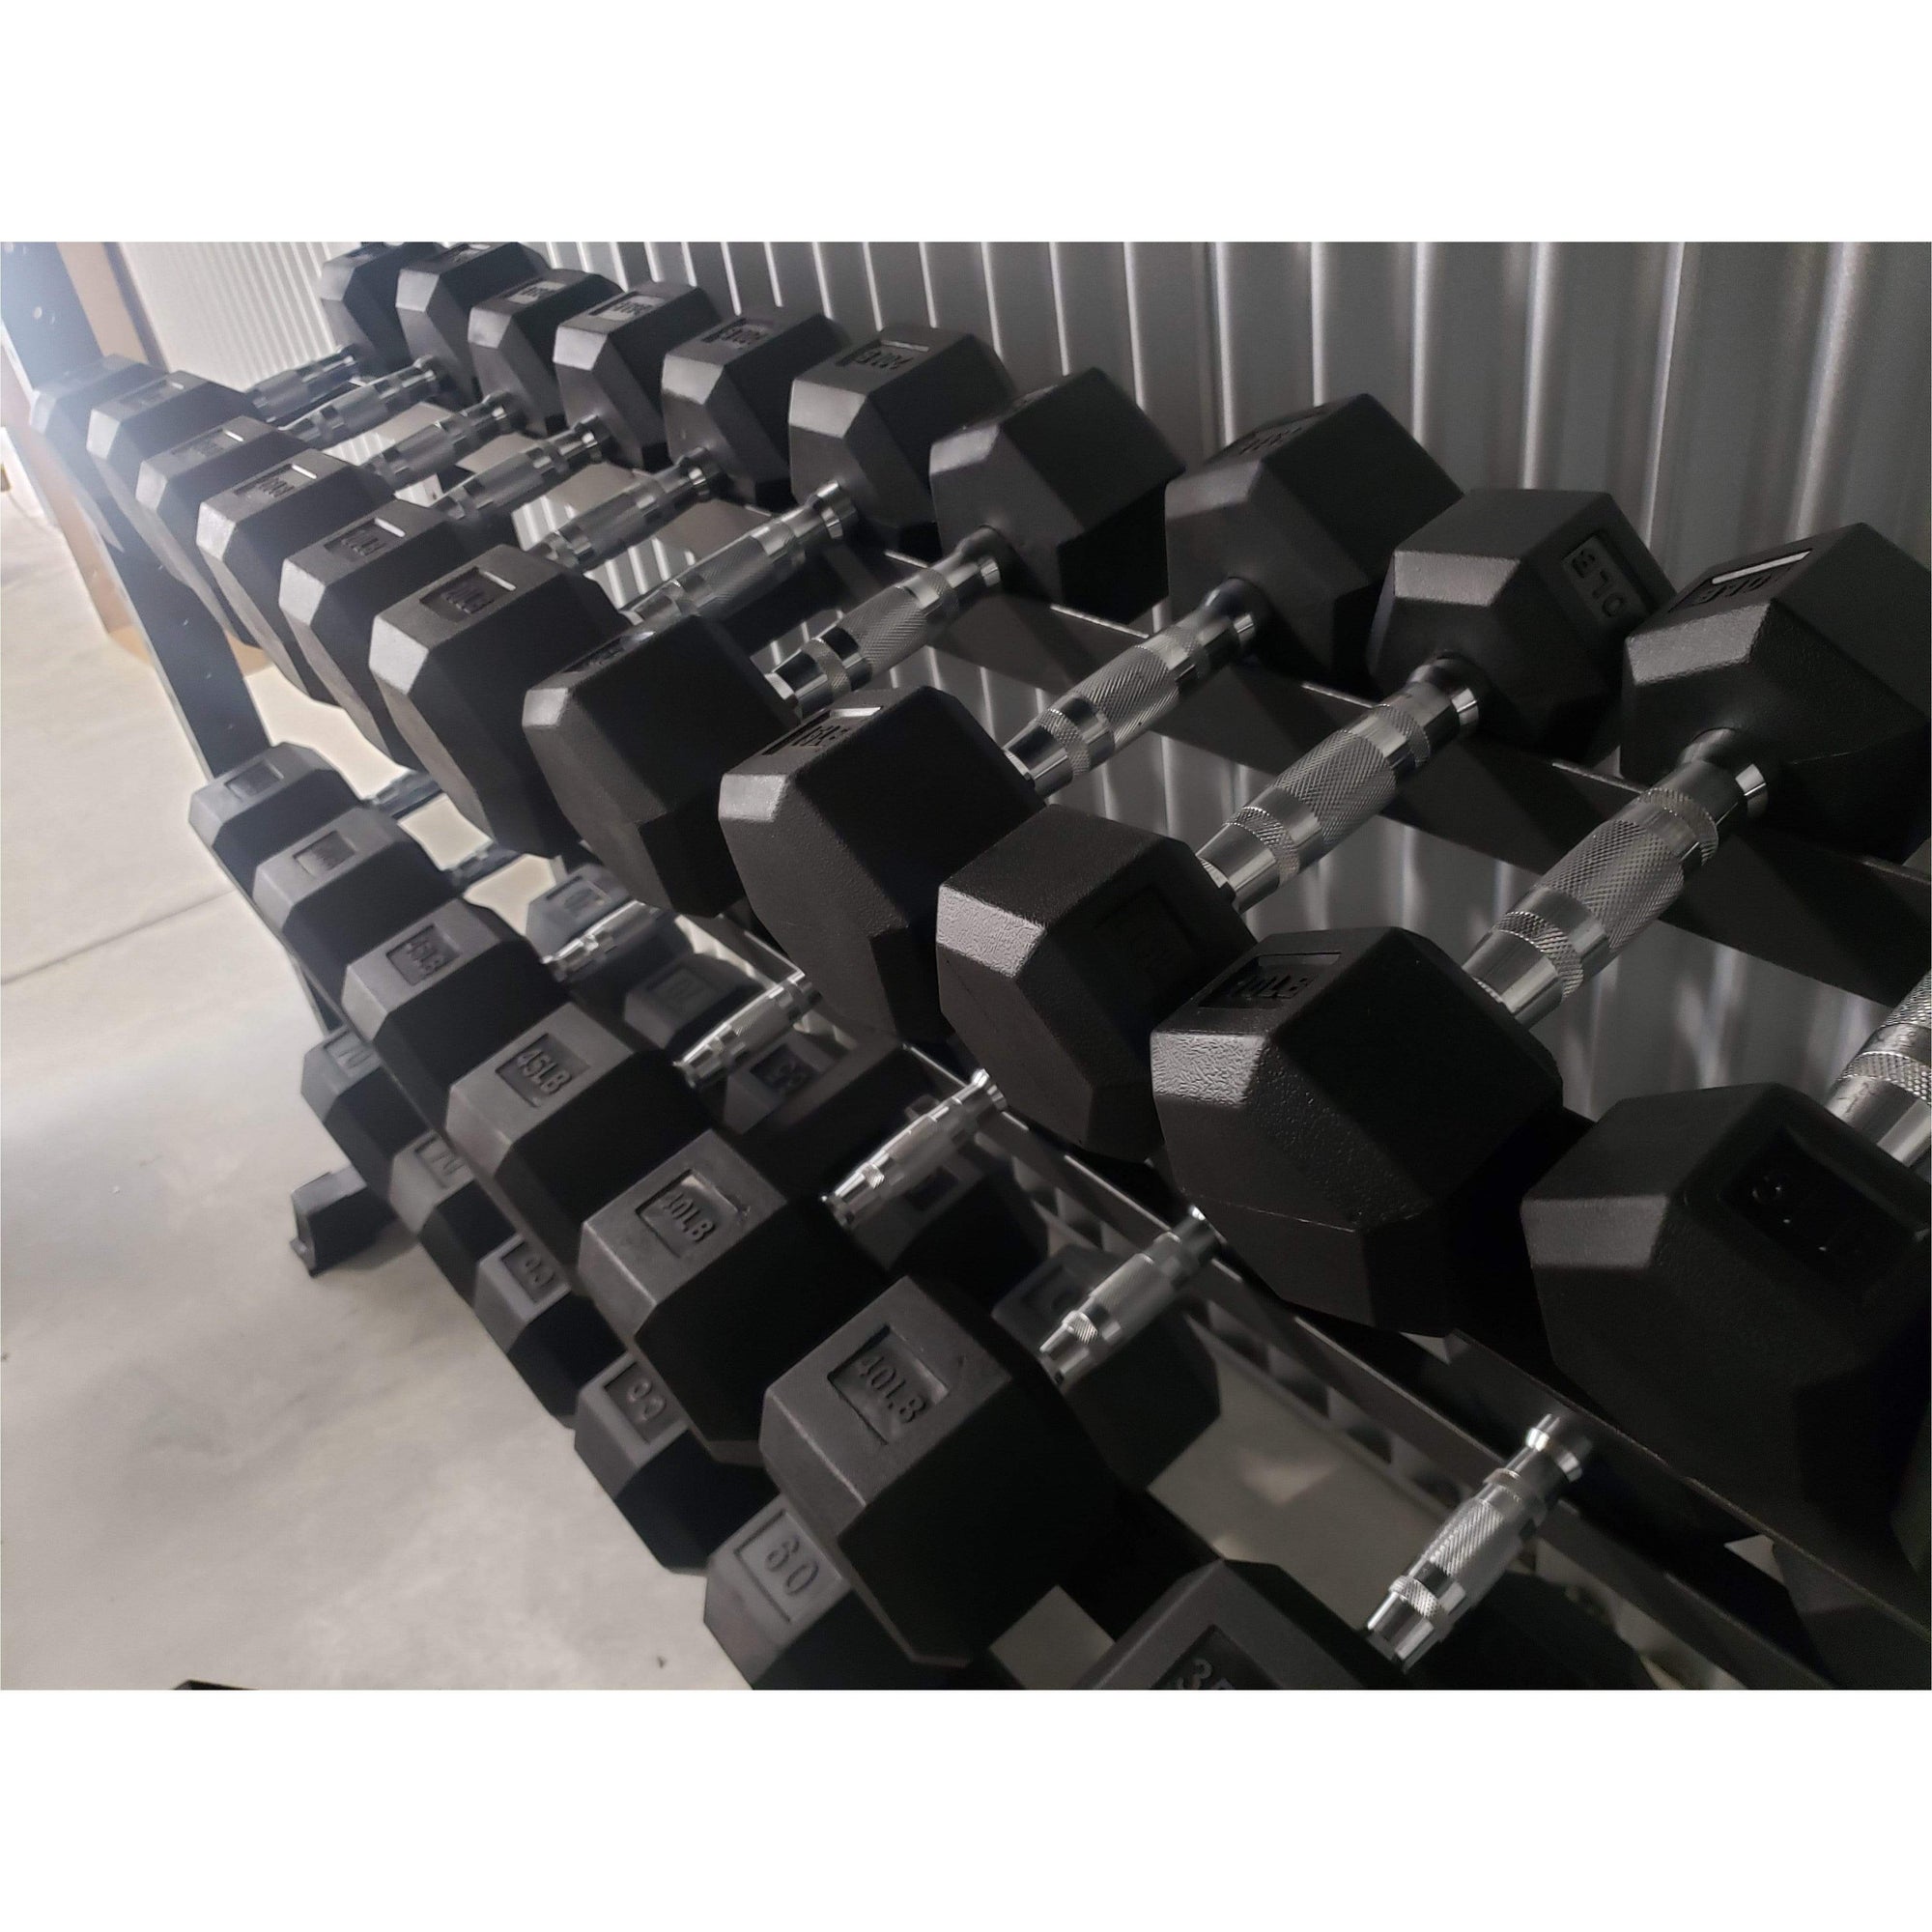 Fit It Out Hex Dumbbells Set - 5 to 25 (lbs)